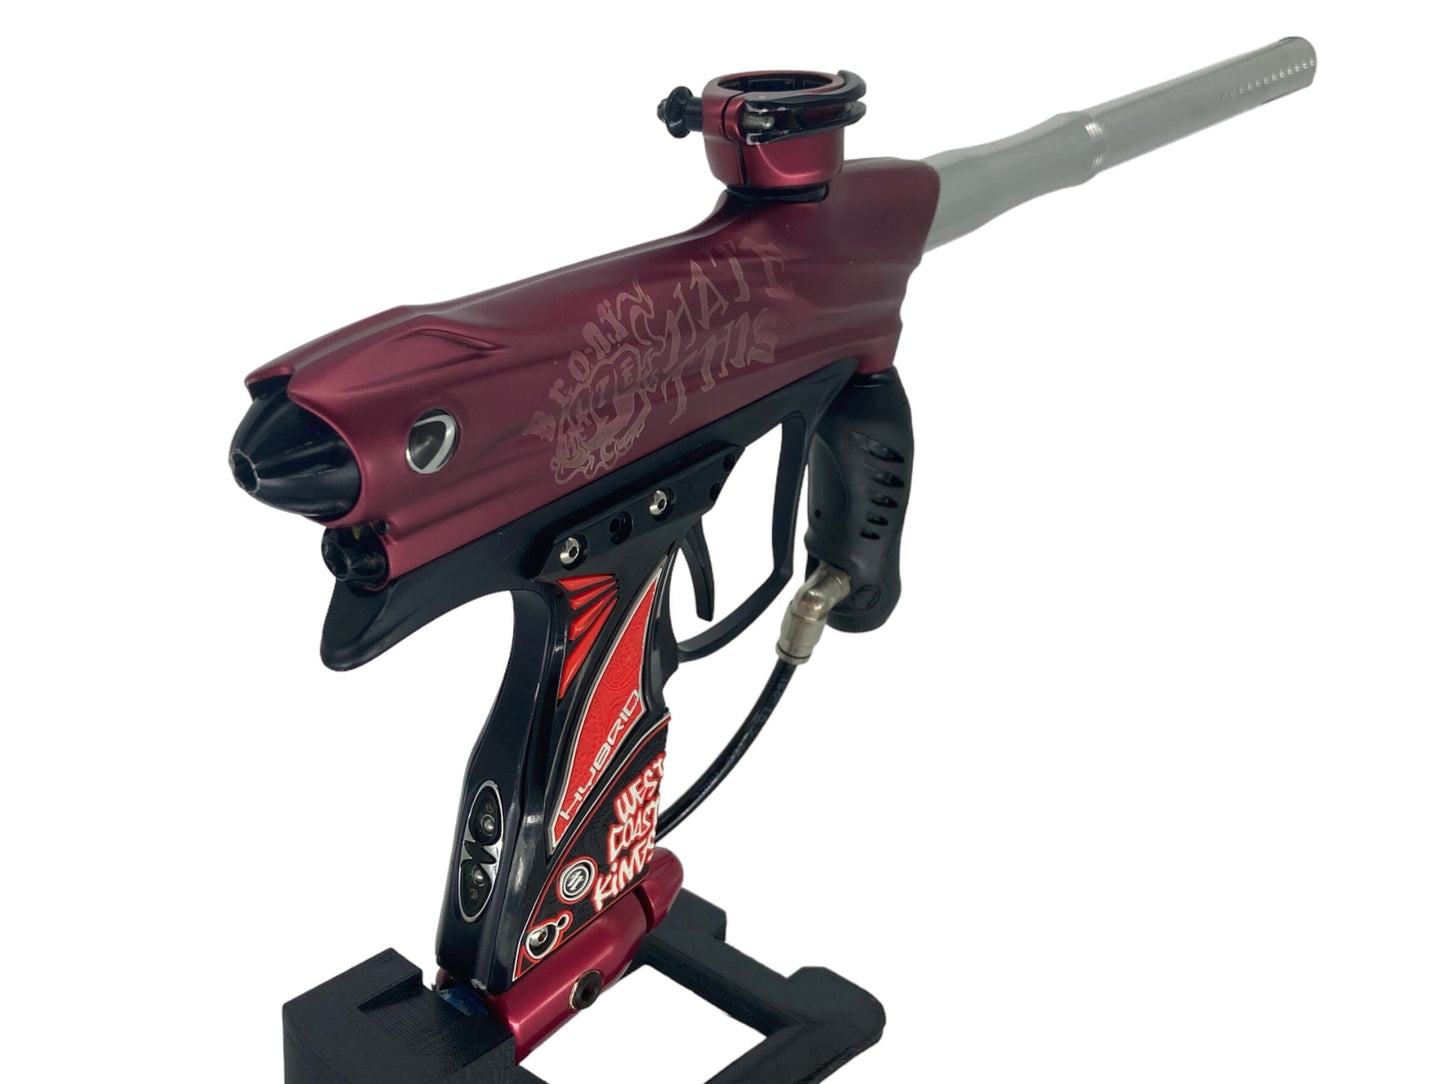 Used Dye Dm 9 Paintball Gun from CPXBrosPaintball Buy/Sell/Trade Paintball Markers, Paintball Hoppers, Paintball Masks, and Hormesis Headbands